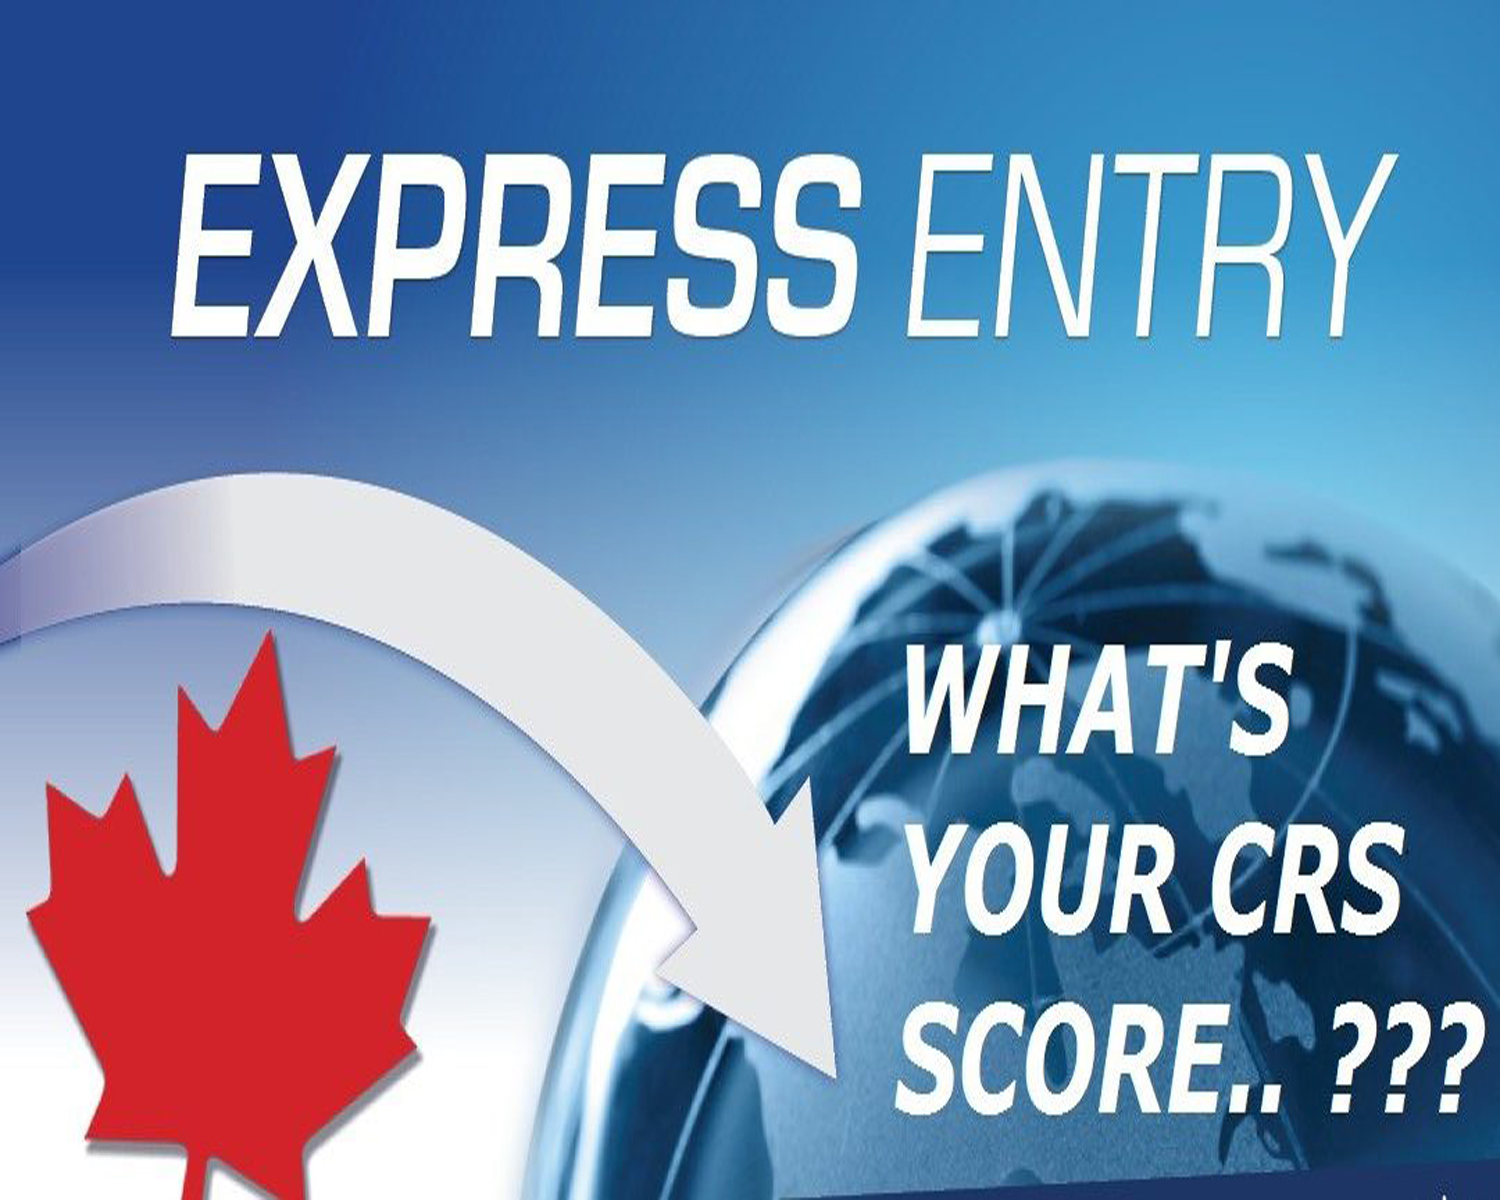 Alberta has invited 374 Express Entry candidates with CRS Score as low as 400 for Canadian permanent residency